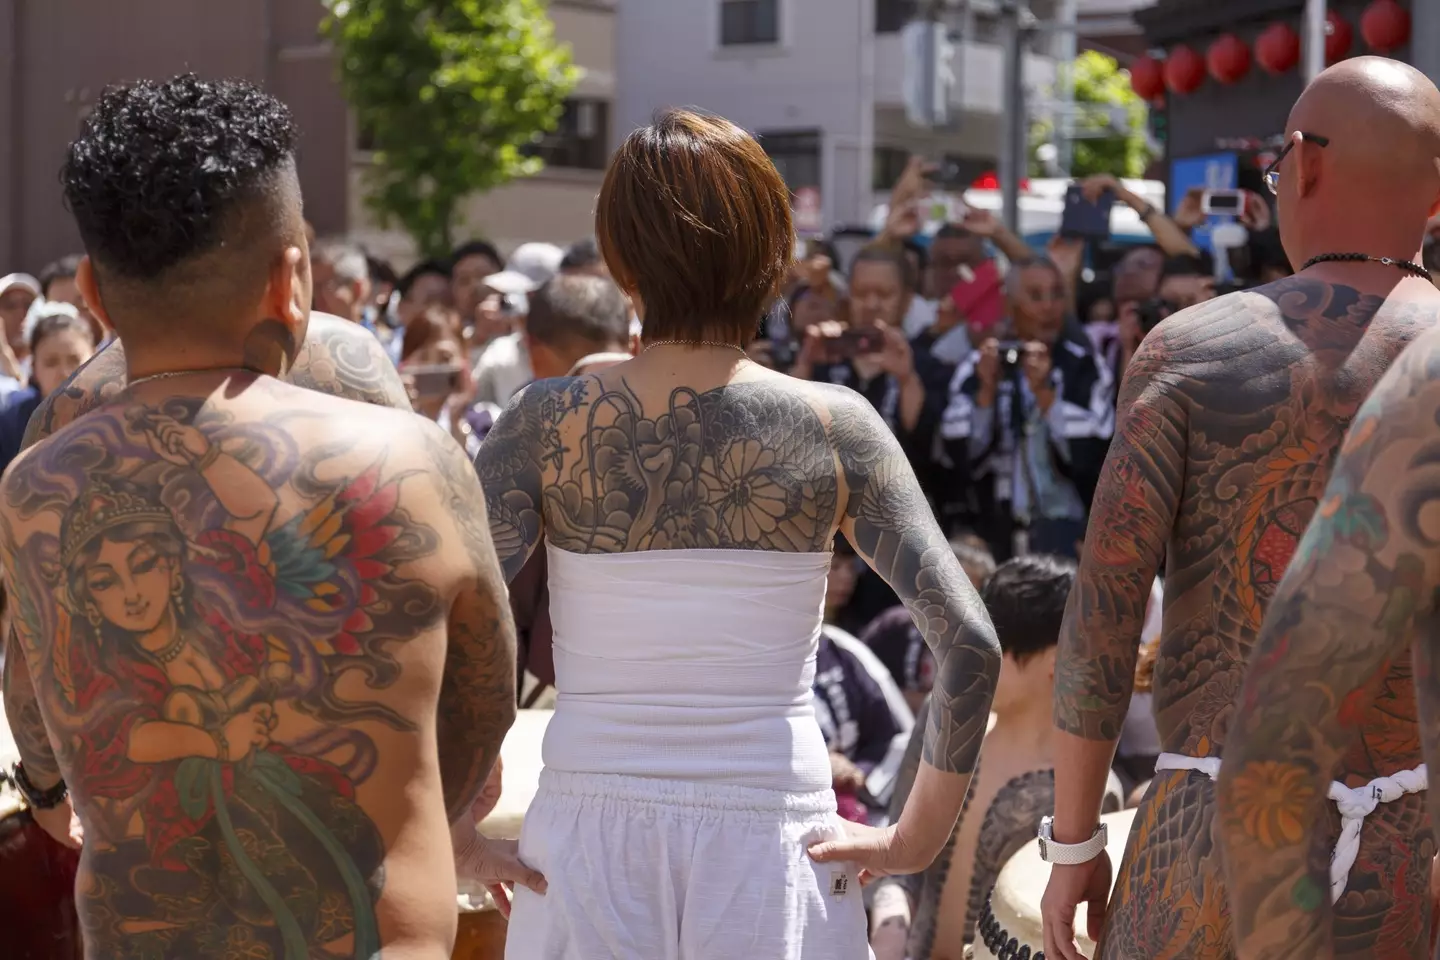 Yakuza members can also be recognised by their tattoos.